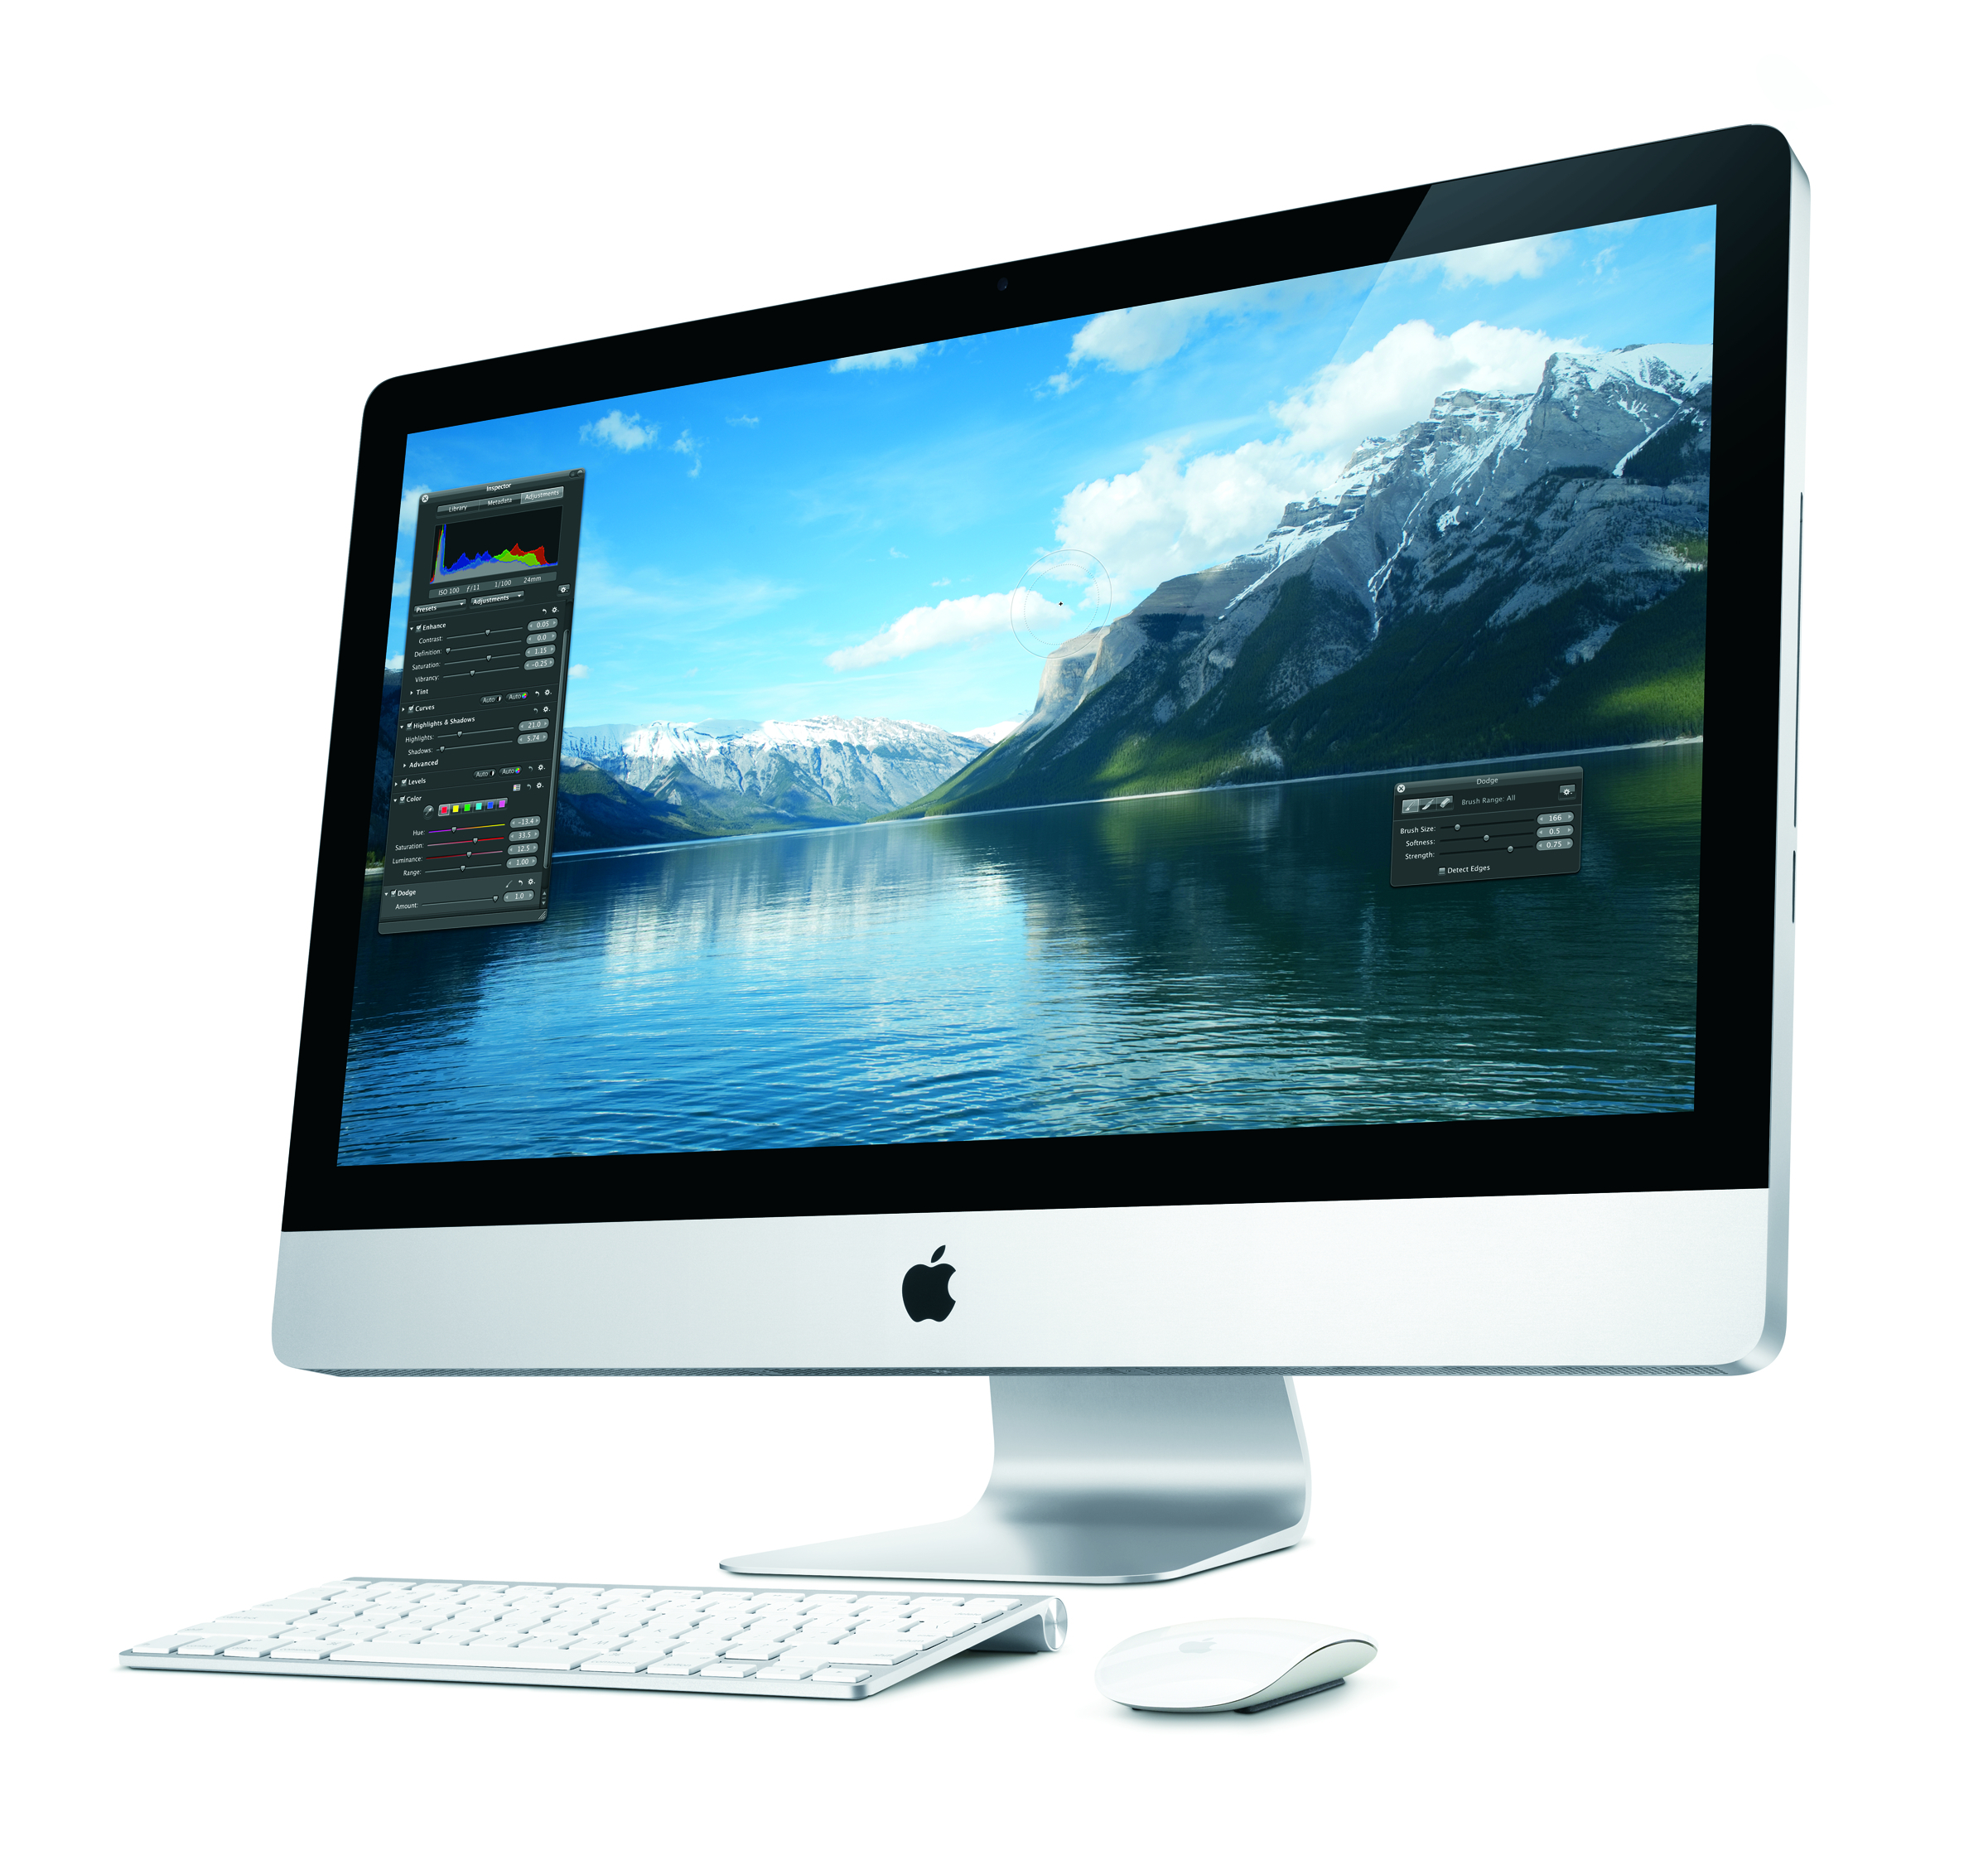 The case of the iMac screen that mysteriously blacks out